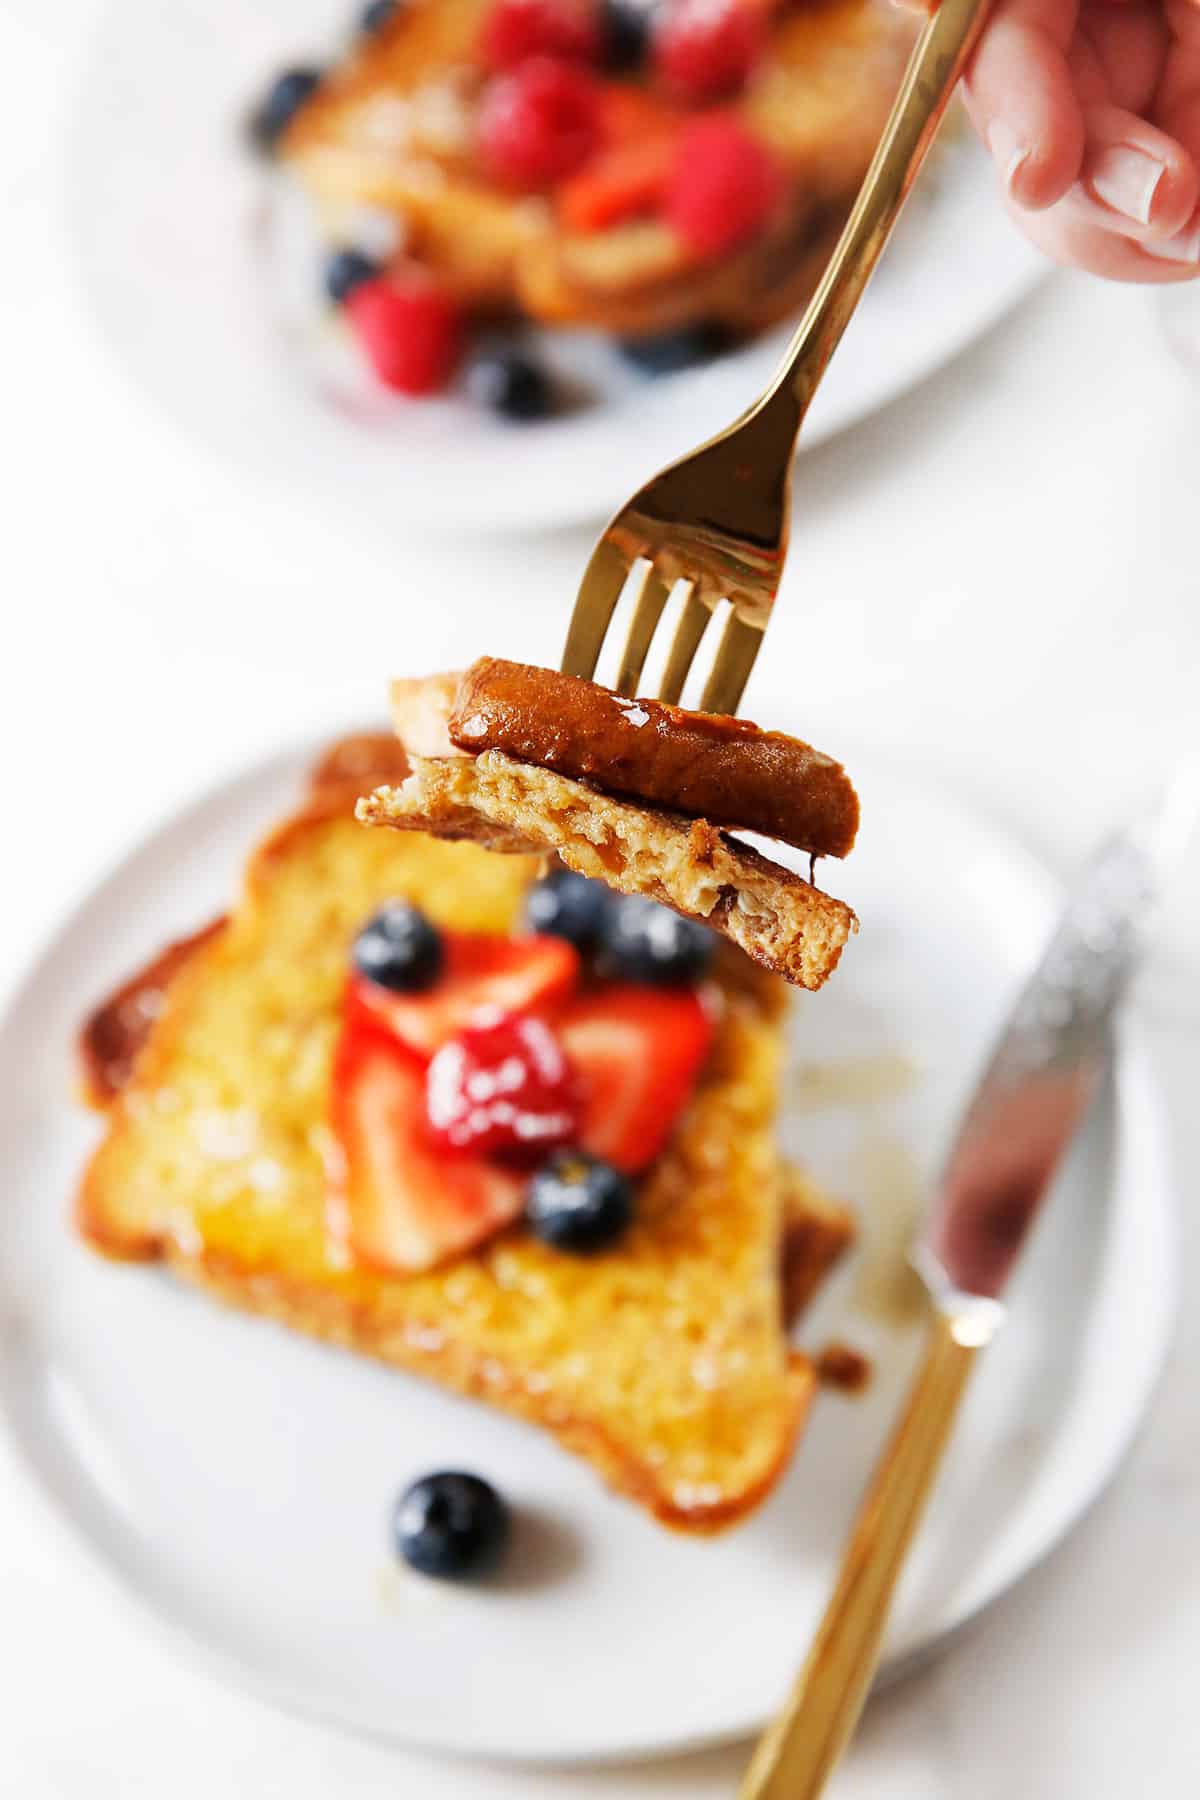 A bite of gluten free french toast